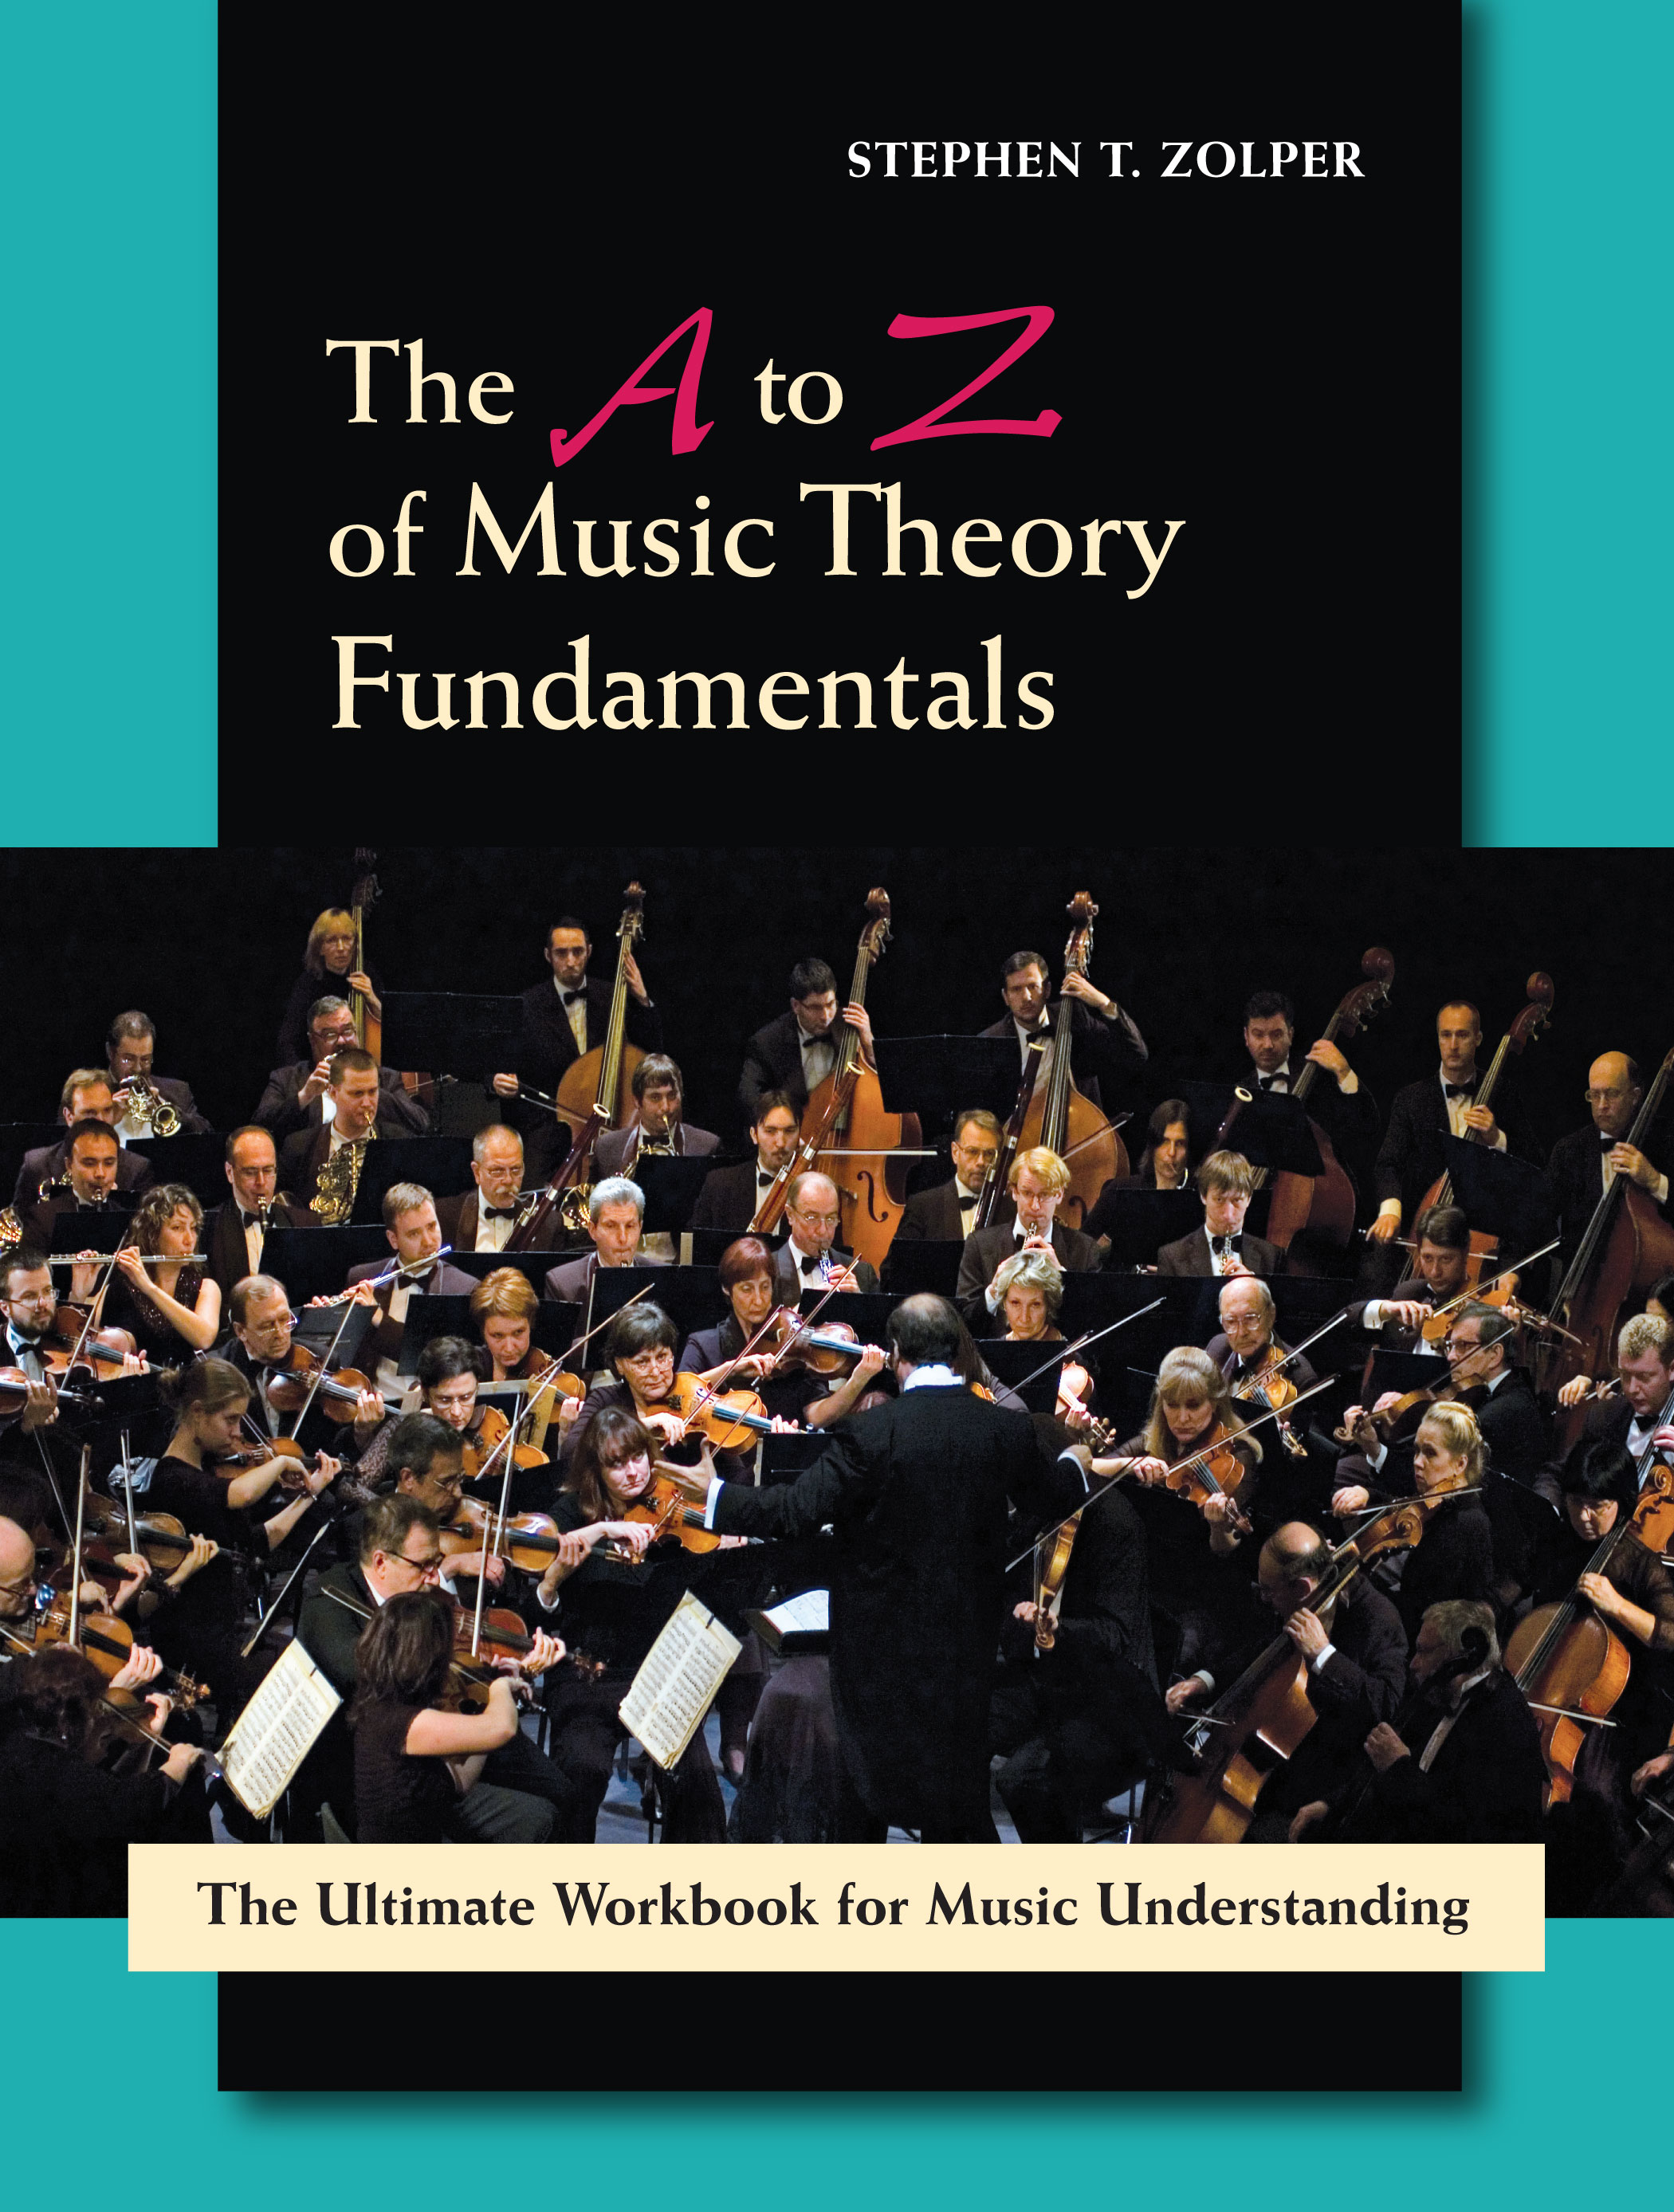 The A to Z of Music Theory Fundamentals: The Ultimate Workbook for Music Understanding by Stephen T. Zolper